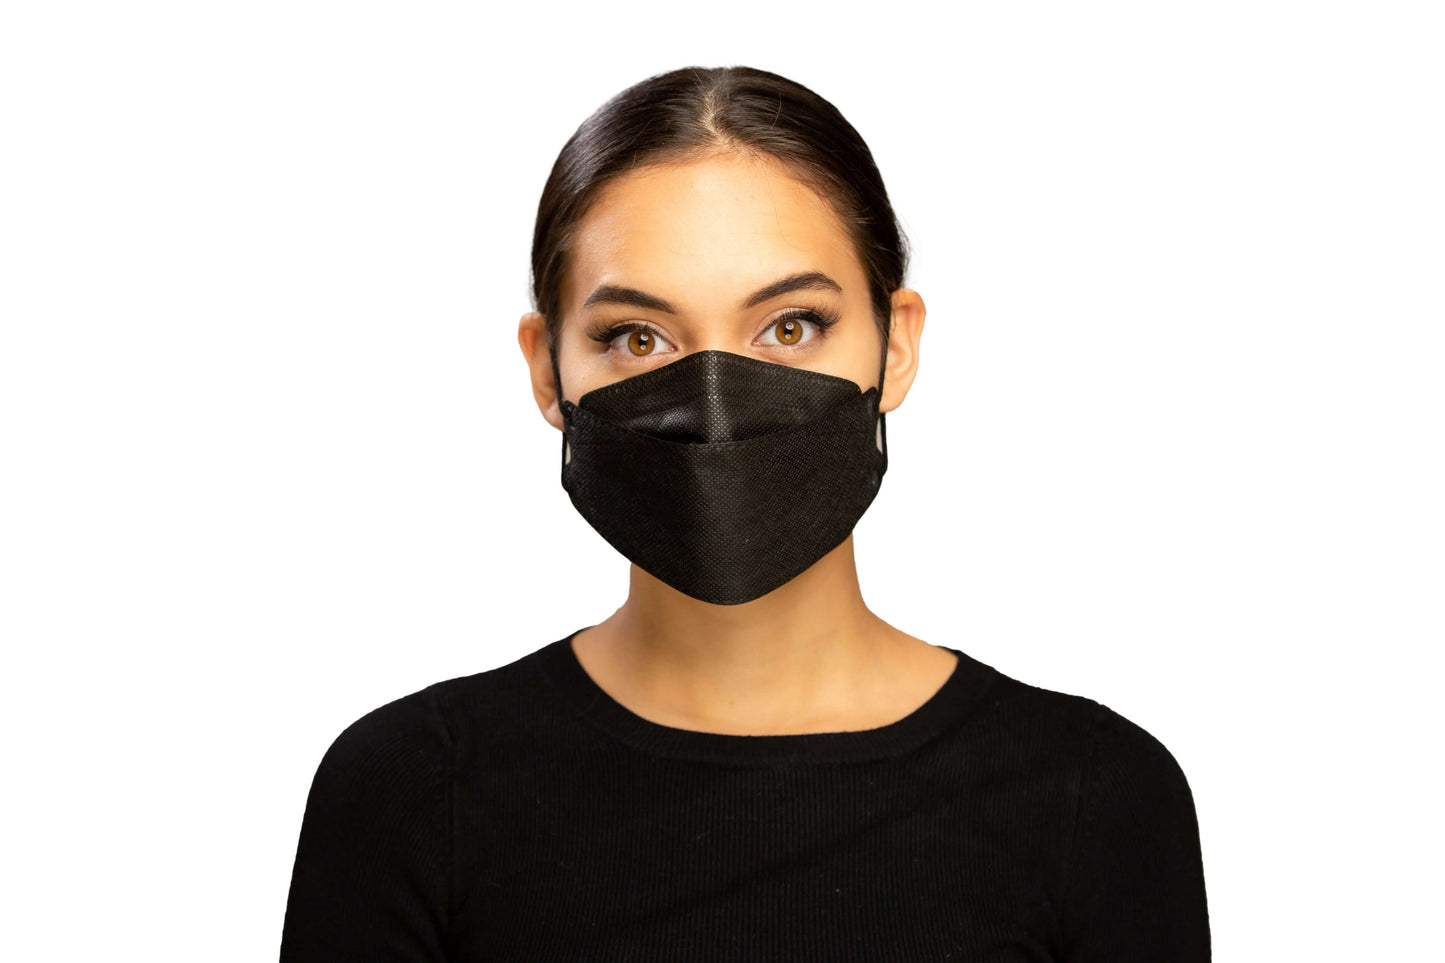 Good Manner KF94 Mask Black Adult (25 Masks) / Free Shipping-The Authorized Distributor in Canada. | Clear Pro Global_Good Manner